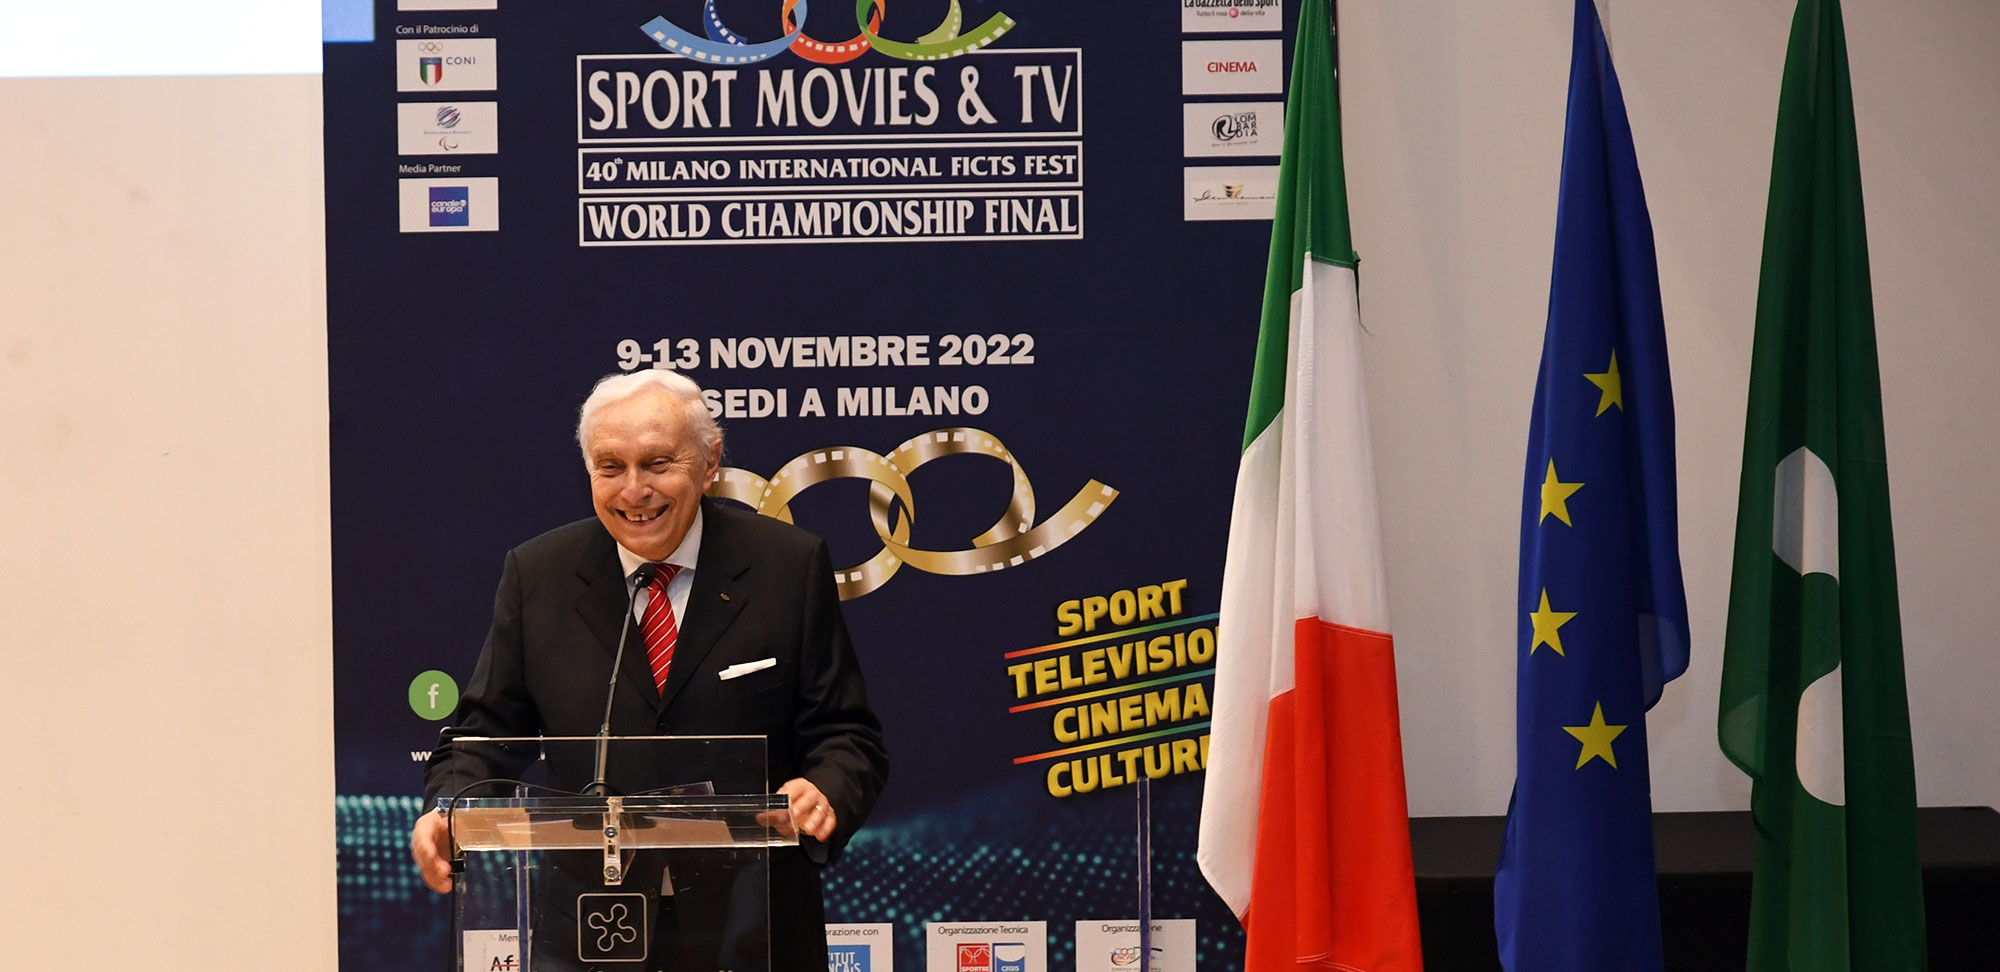 SPORT MOVIES & TV 2022: THANK YOU!